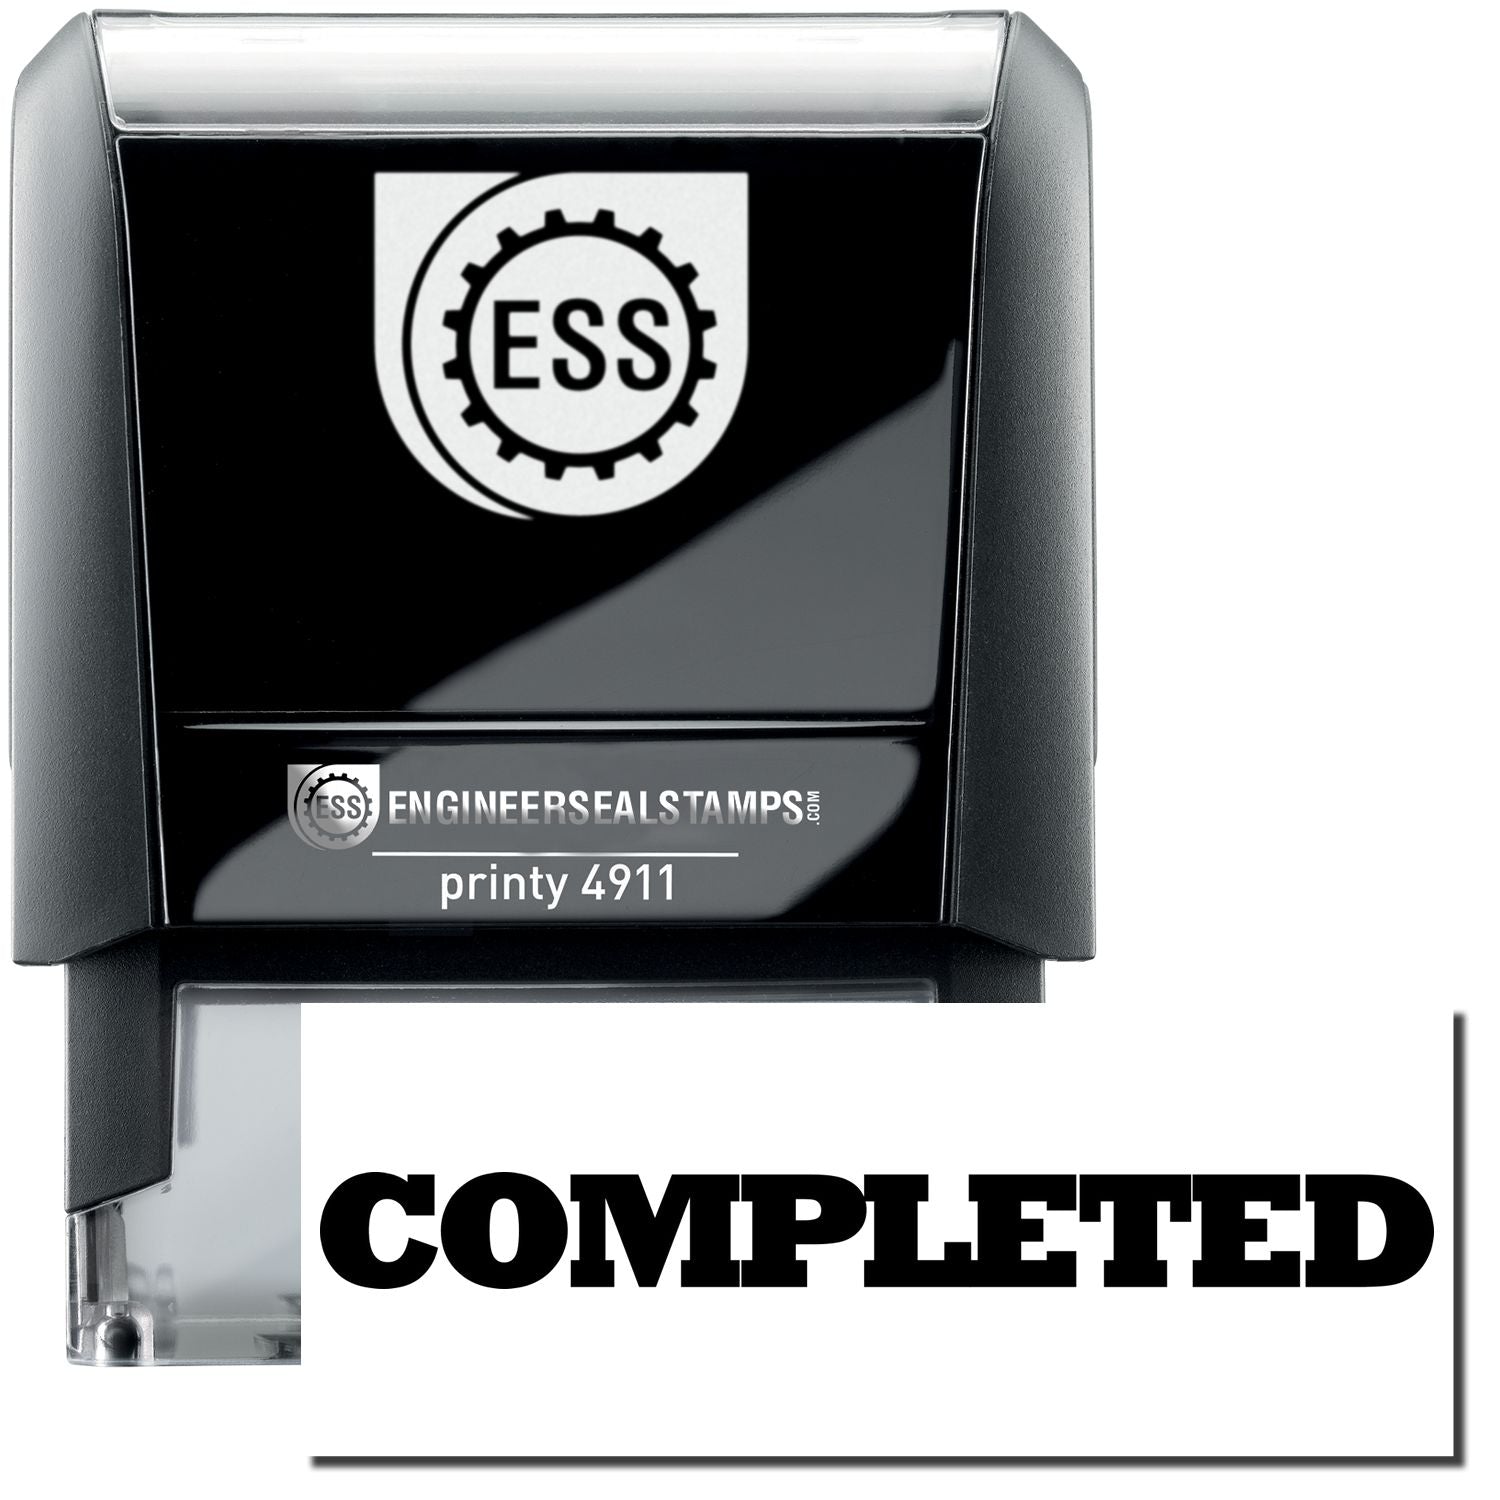 A self-inking stamp with a stamped image showing how the text "COMPLETED" in bold font is displayed after stamping.